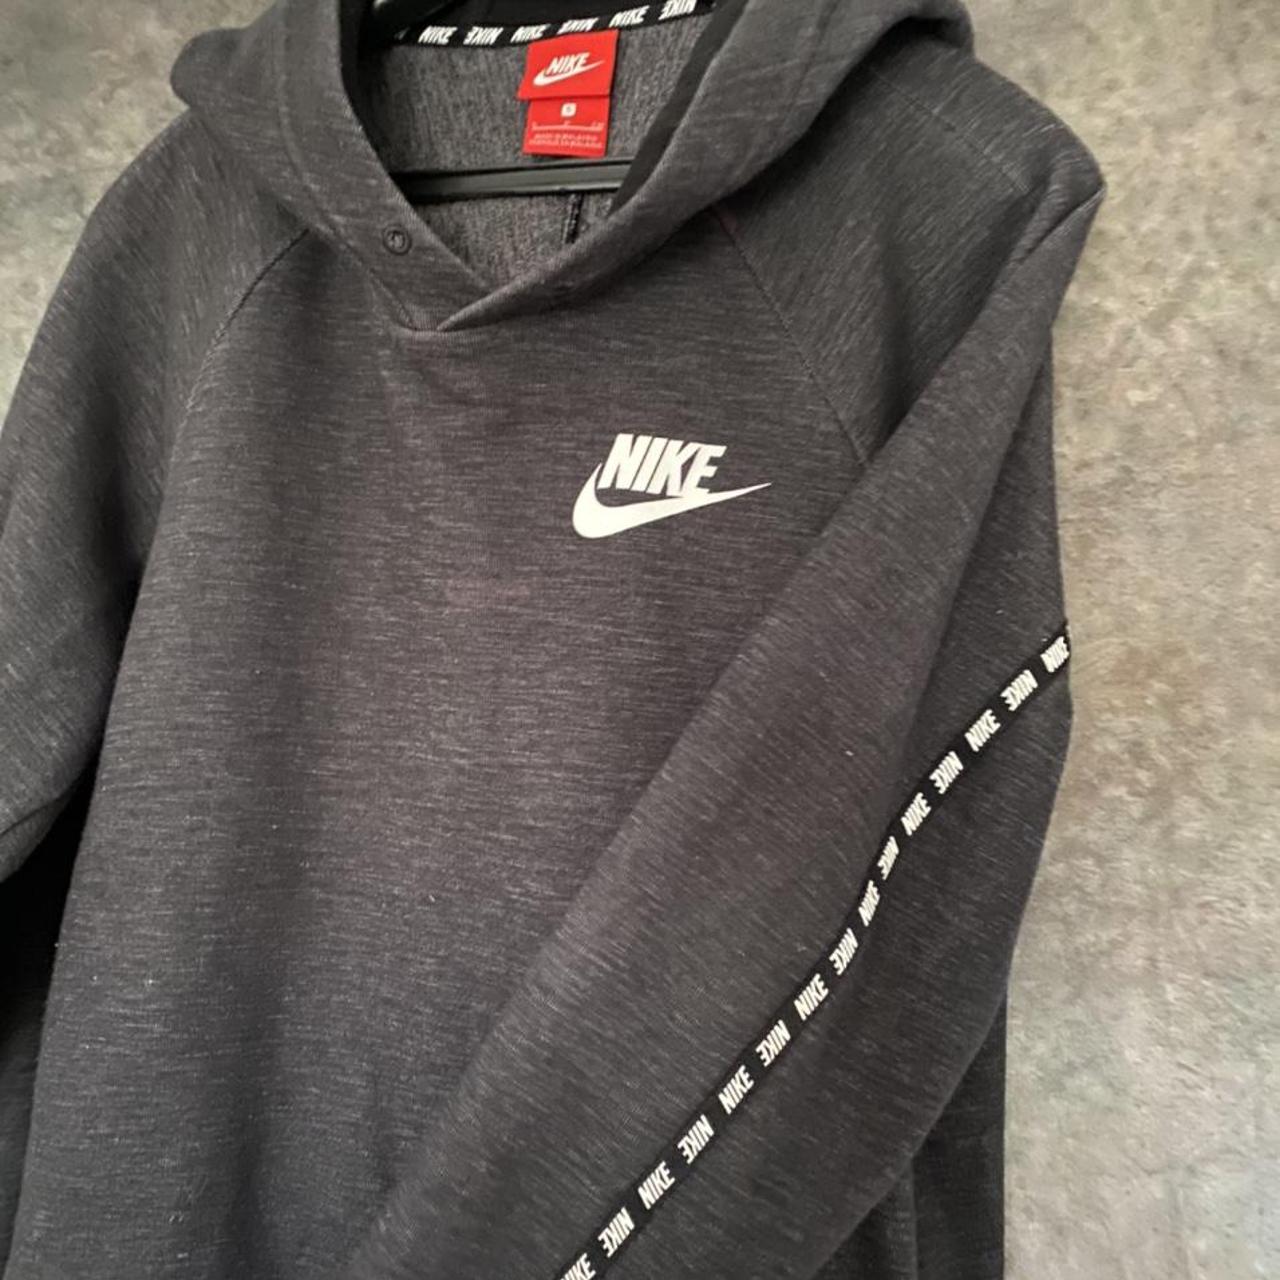 Dark Grey Nike Hoodie Perfect for working out or... - Depop